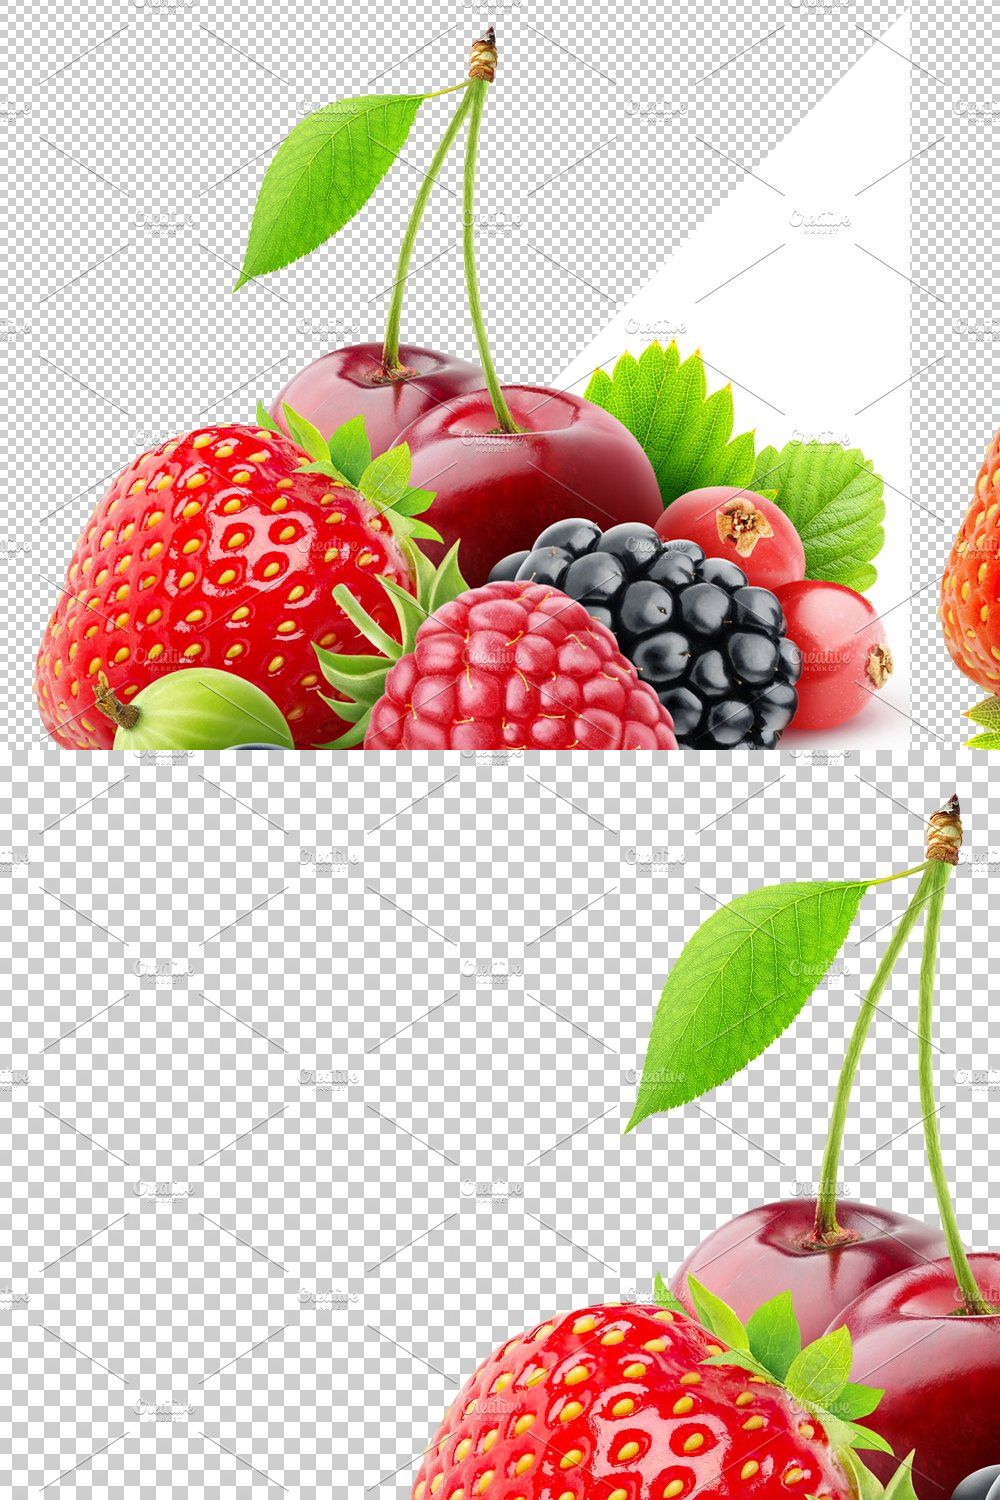 Berries in a pile pinterest preview image.